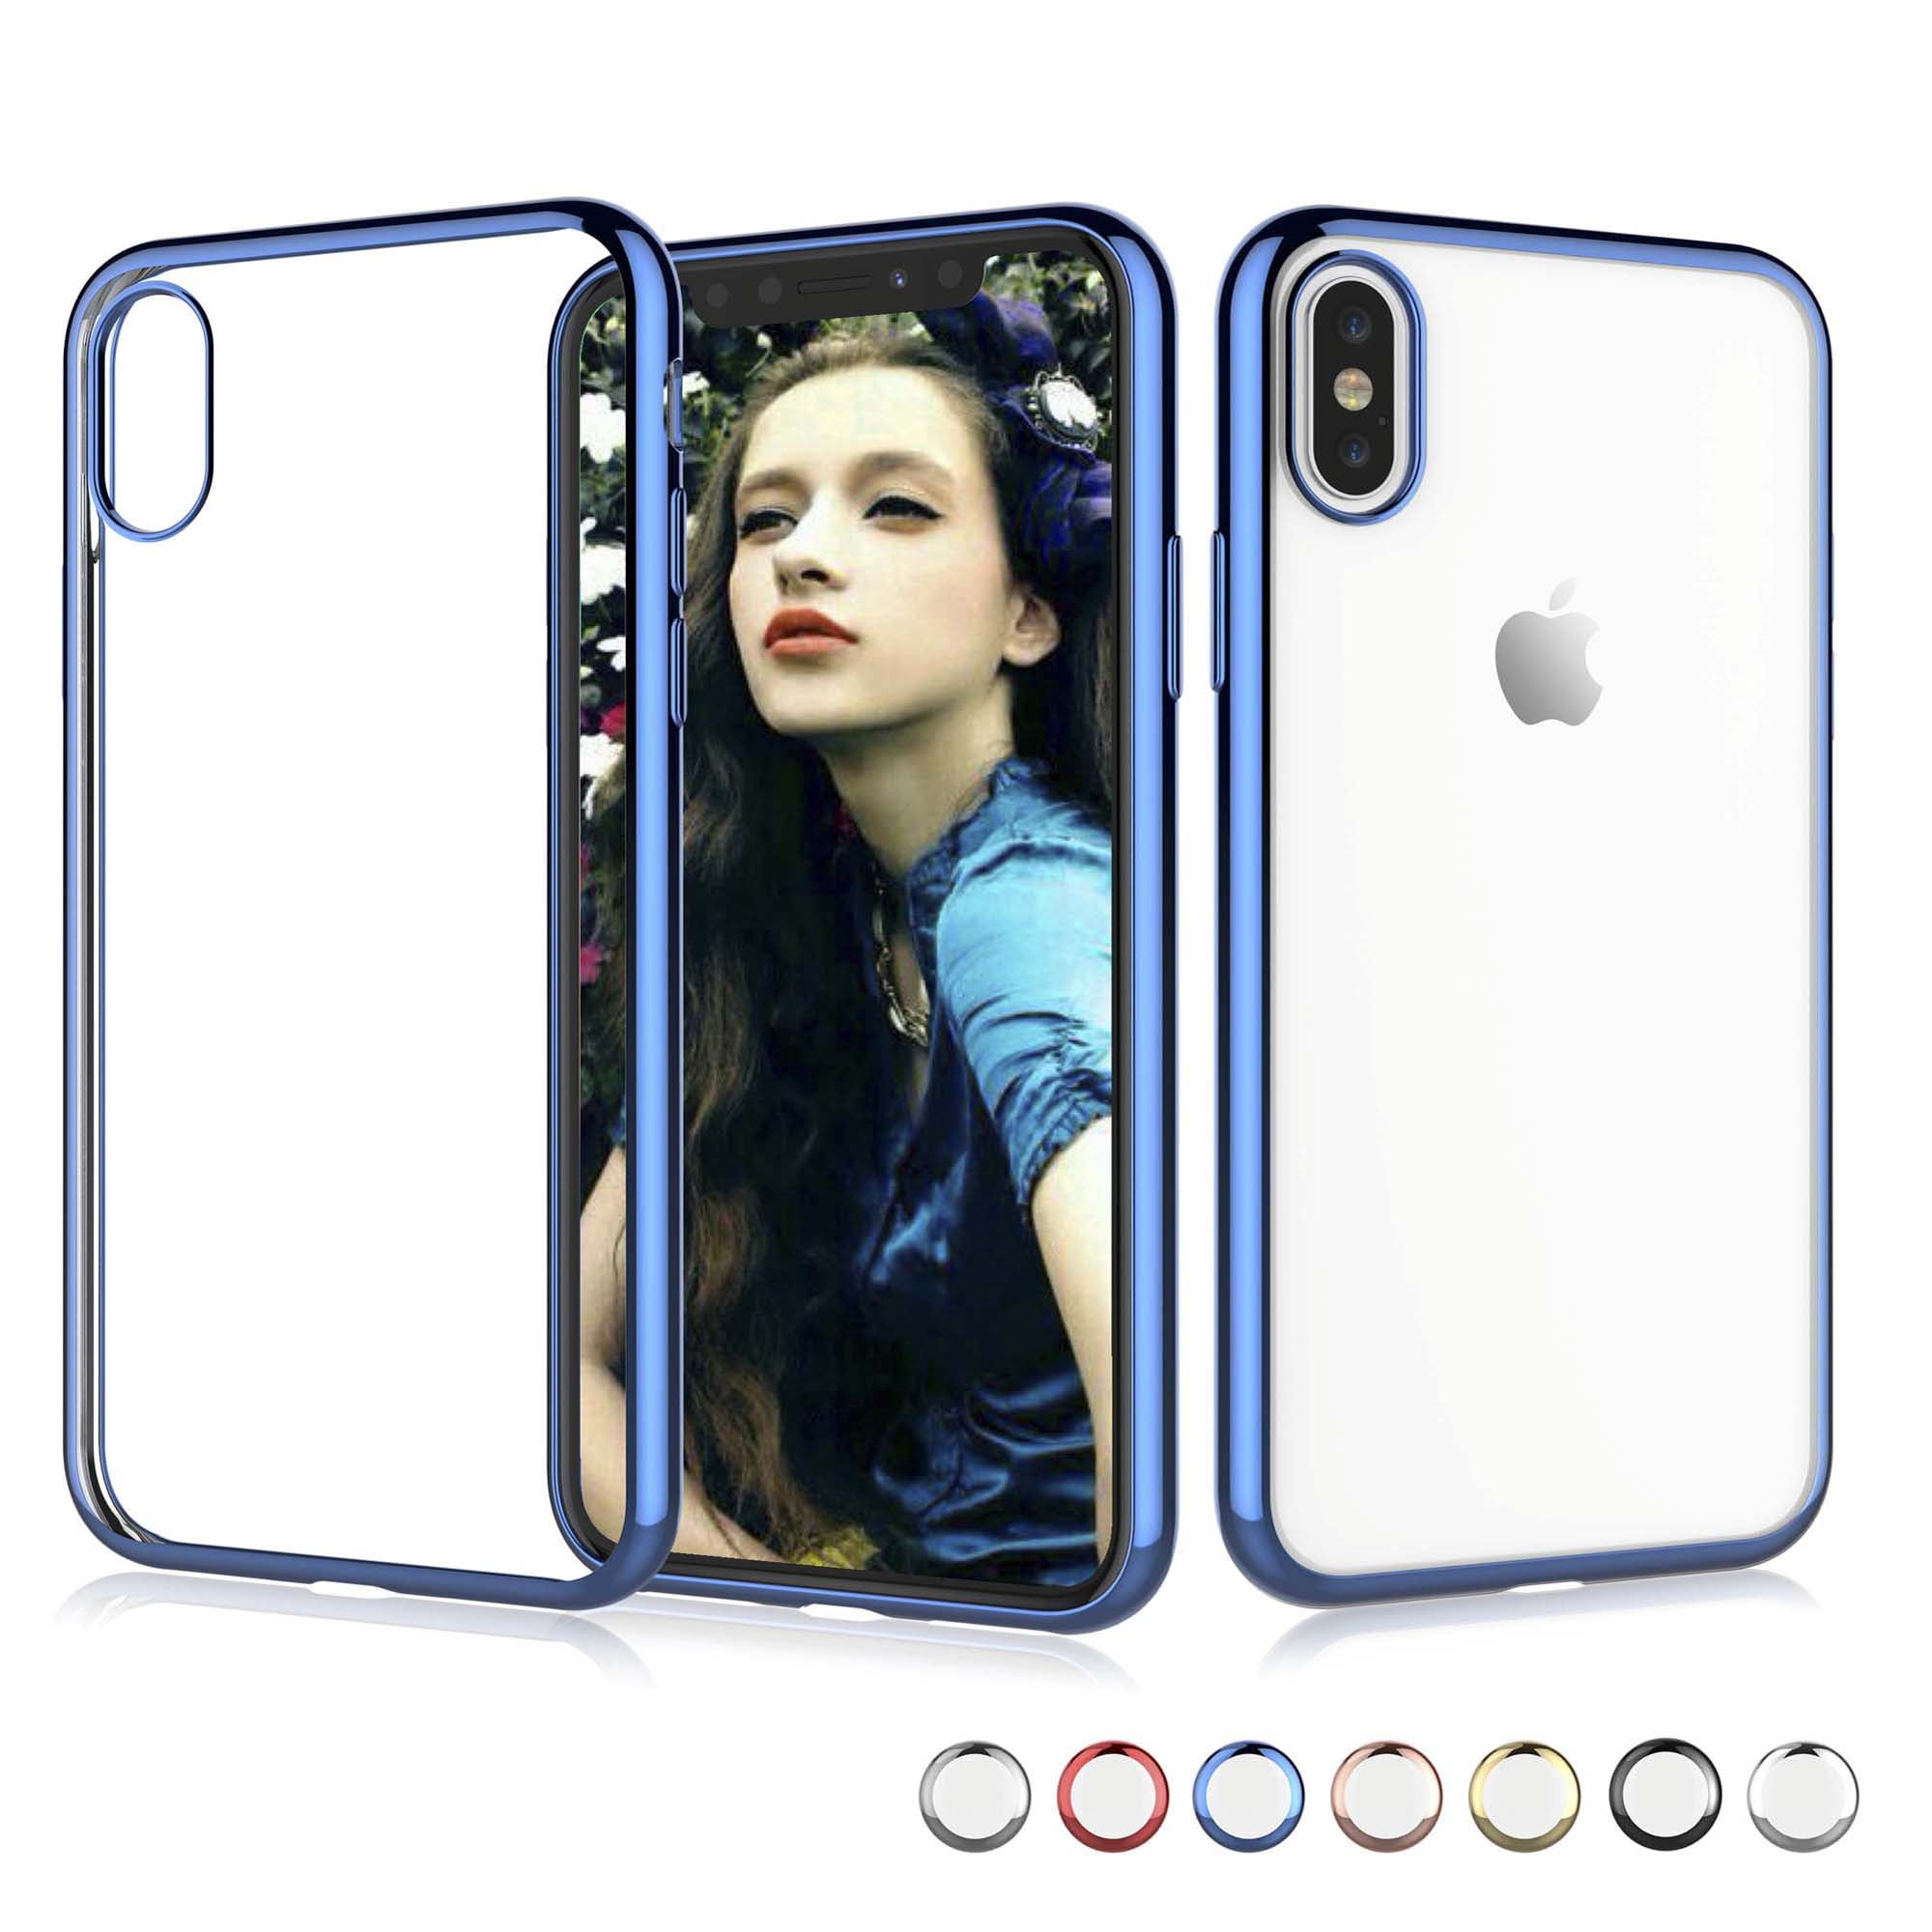 Njjex Case for 6.5" iPhone Xs Max Slim Clear Cover, Soft Flexible TPU Cover for 6.5 inch Xs Max(2018) (Blue Frame)